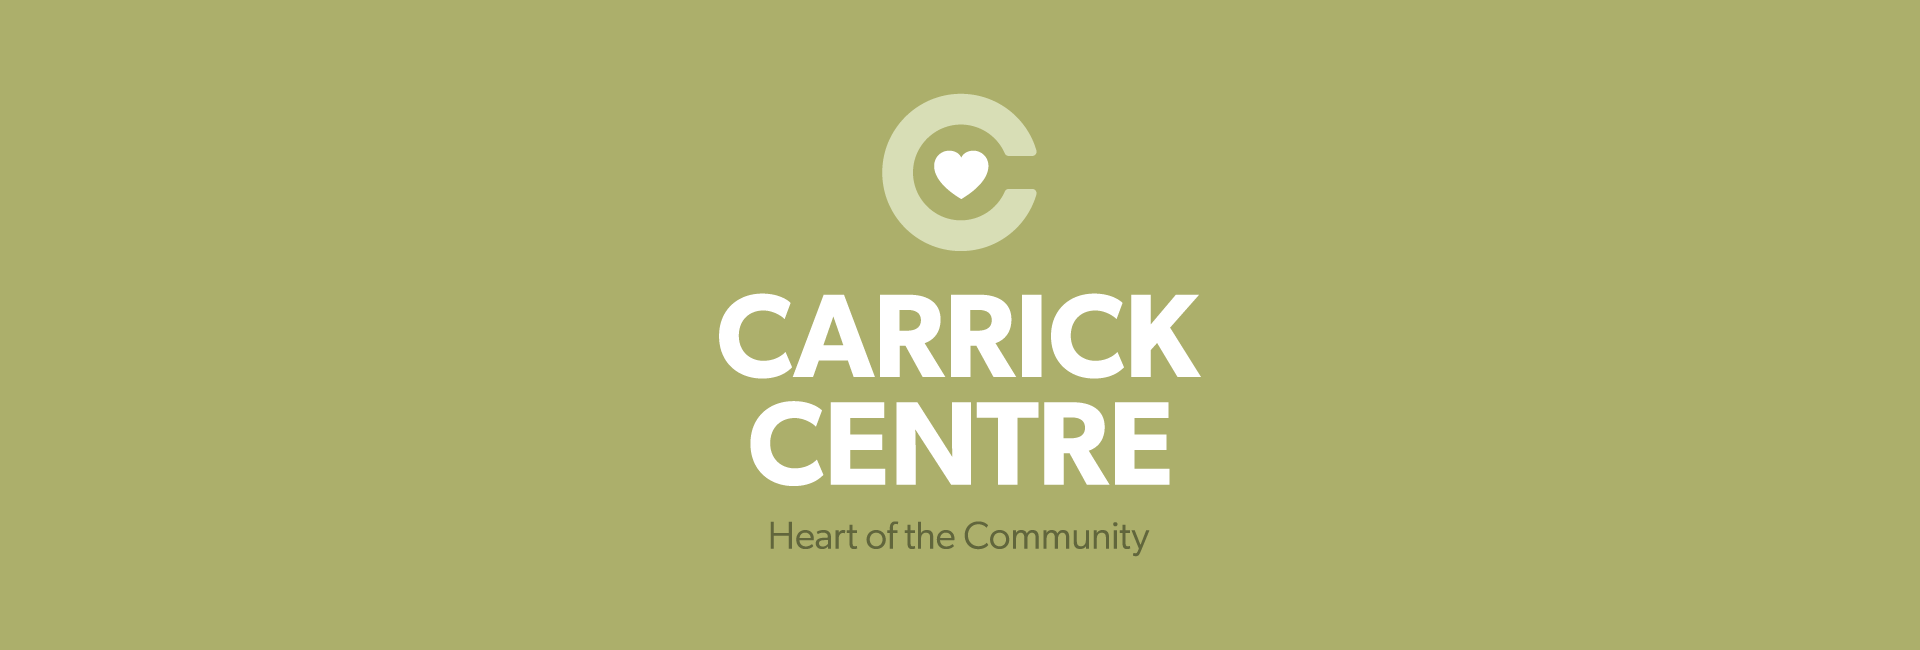 a logo for the carrick centre which is a heart of the community